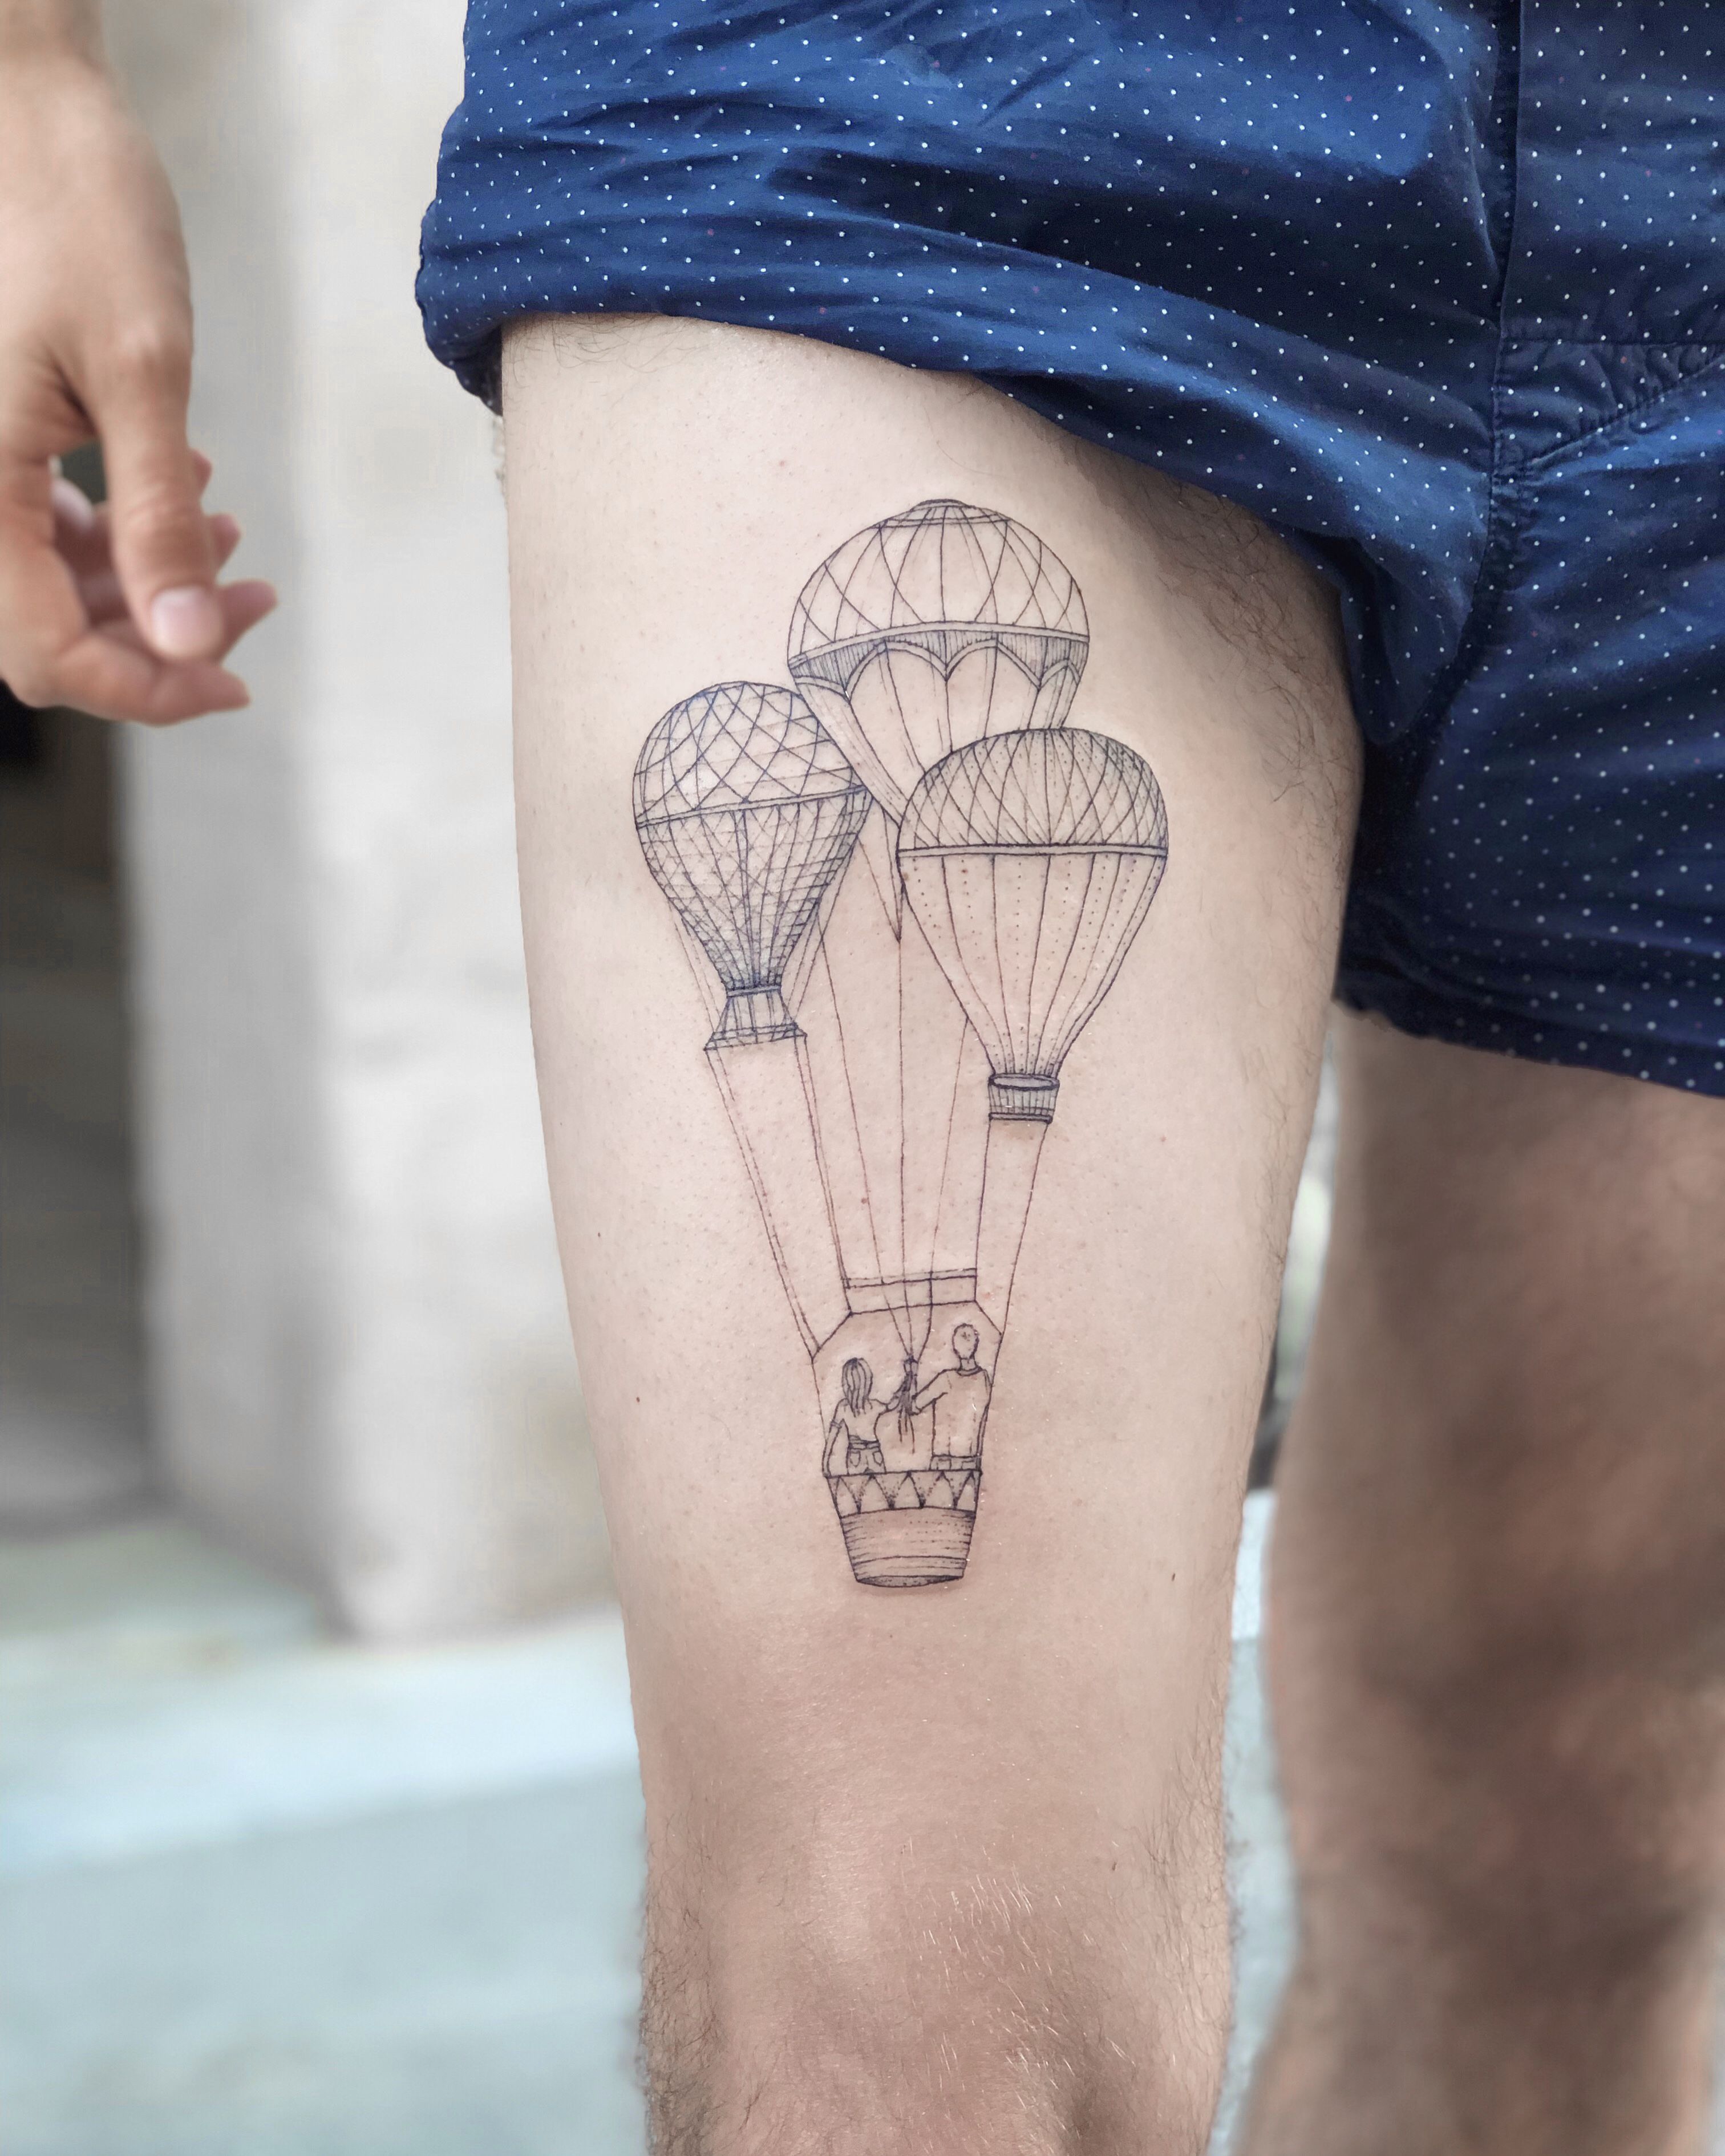 Breath and let go Tattoo watercolor balloon   Balloon tattoo Tattoos  Mini tattoos